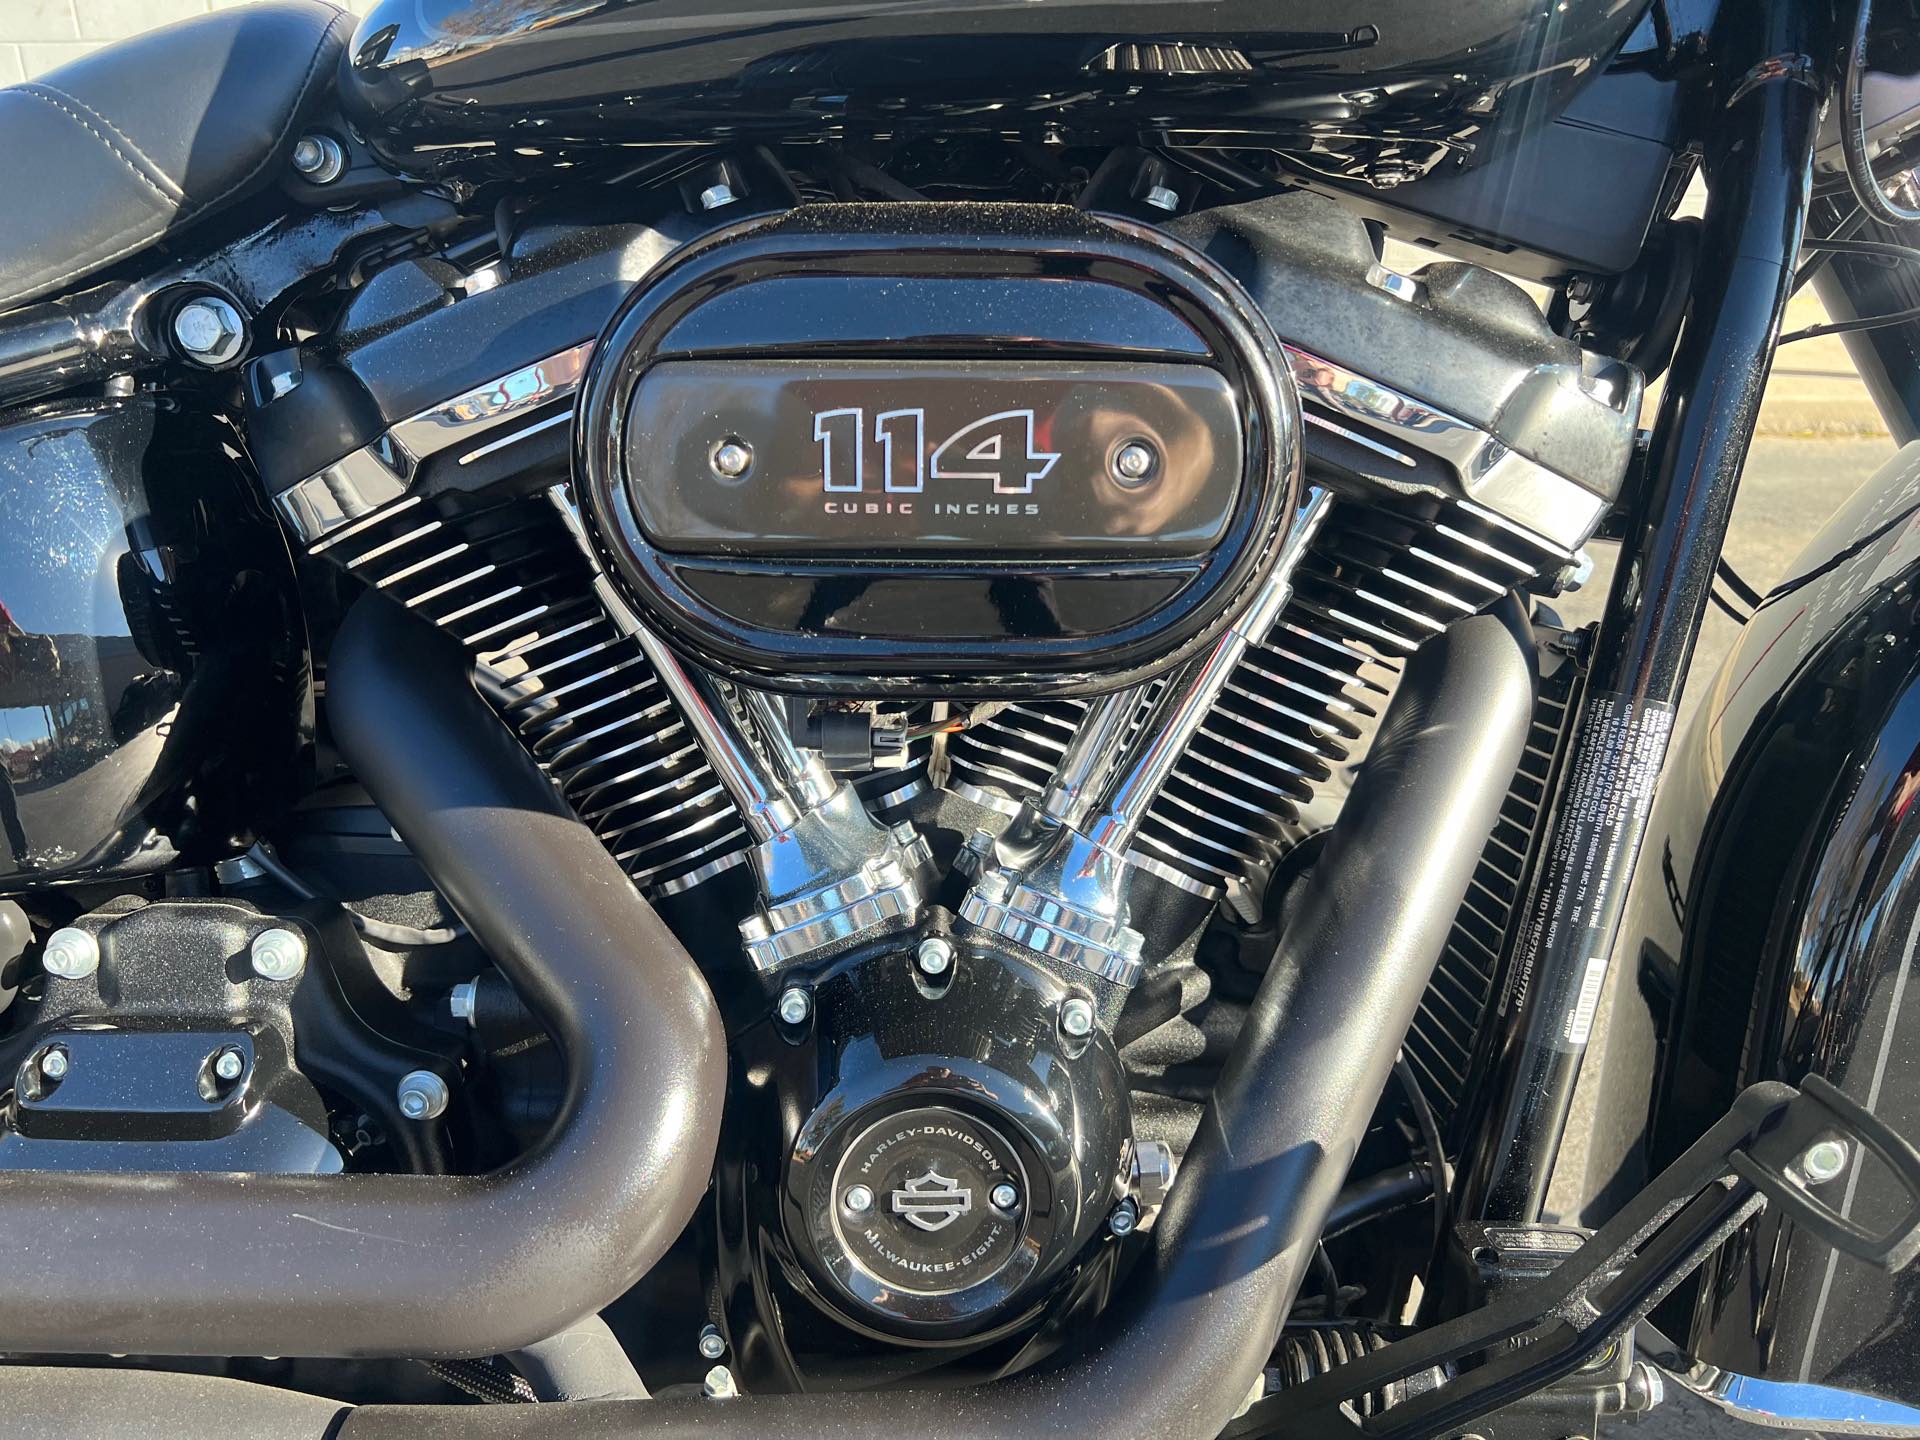 2019 Harley-Davidson Softail Heritage Classic 114 at Aces Motorcycles - Fort Collins